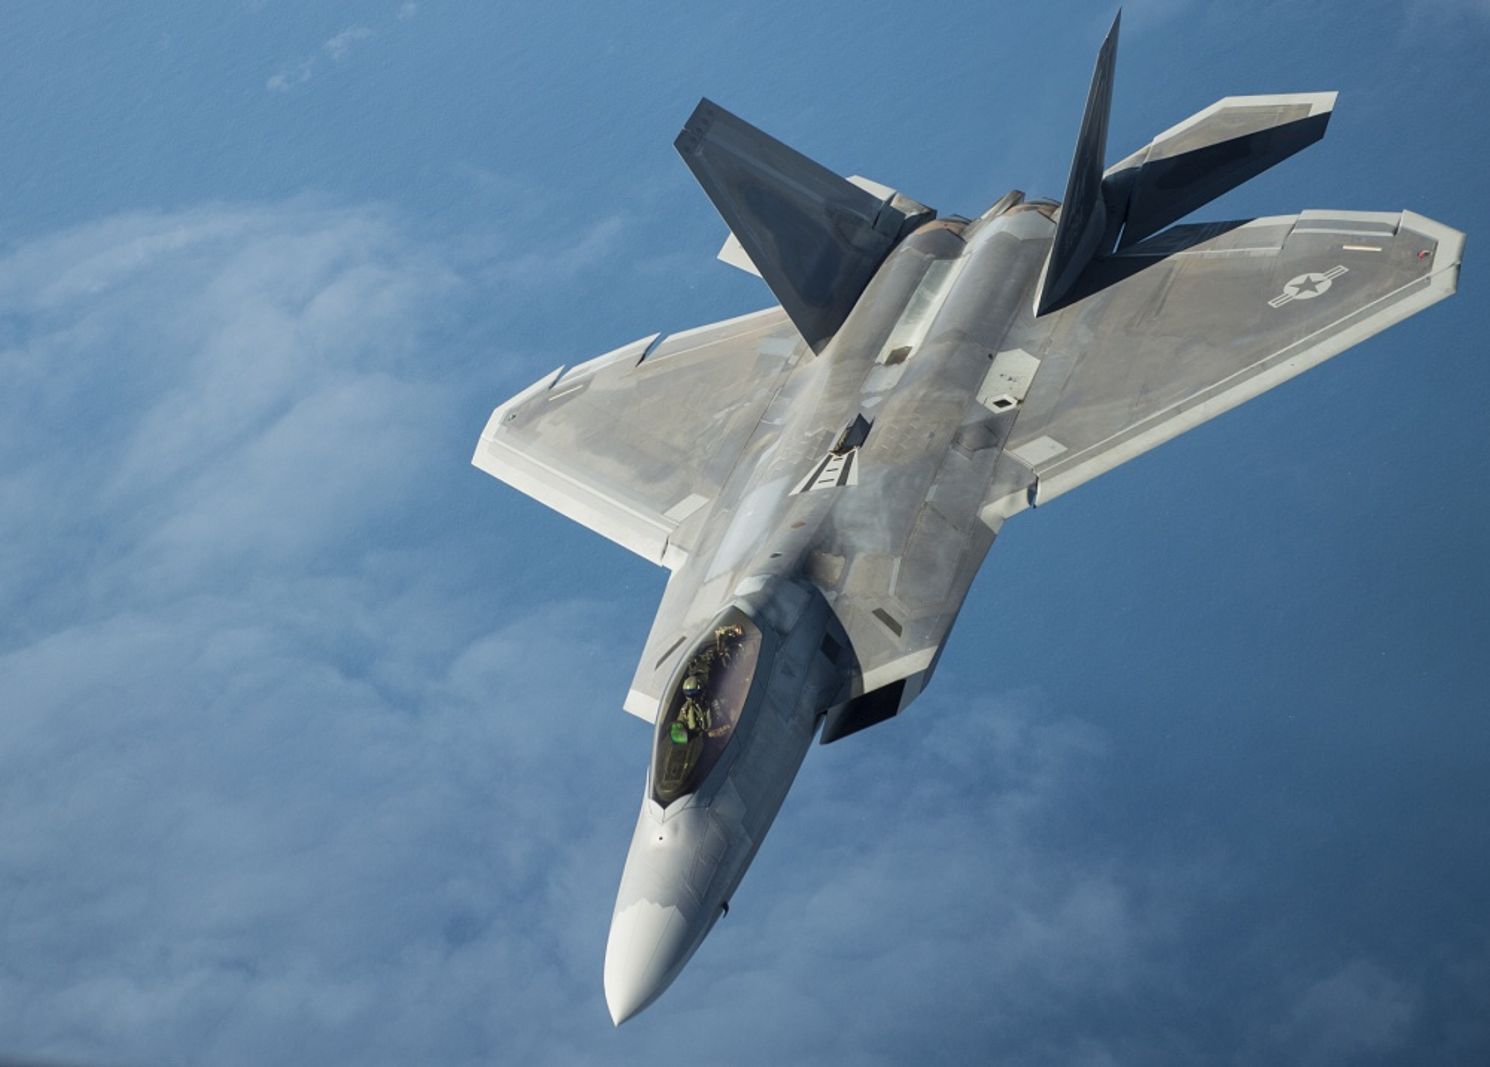 It'S Official: The F-22 Raptor Is The Ultimate Aerial Killing Machine | The National Interest